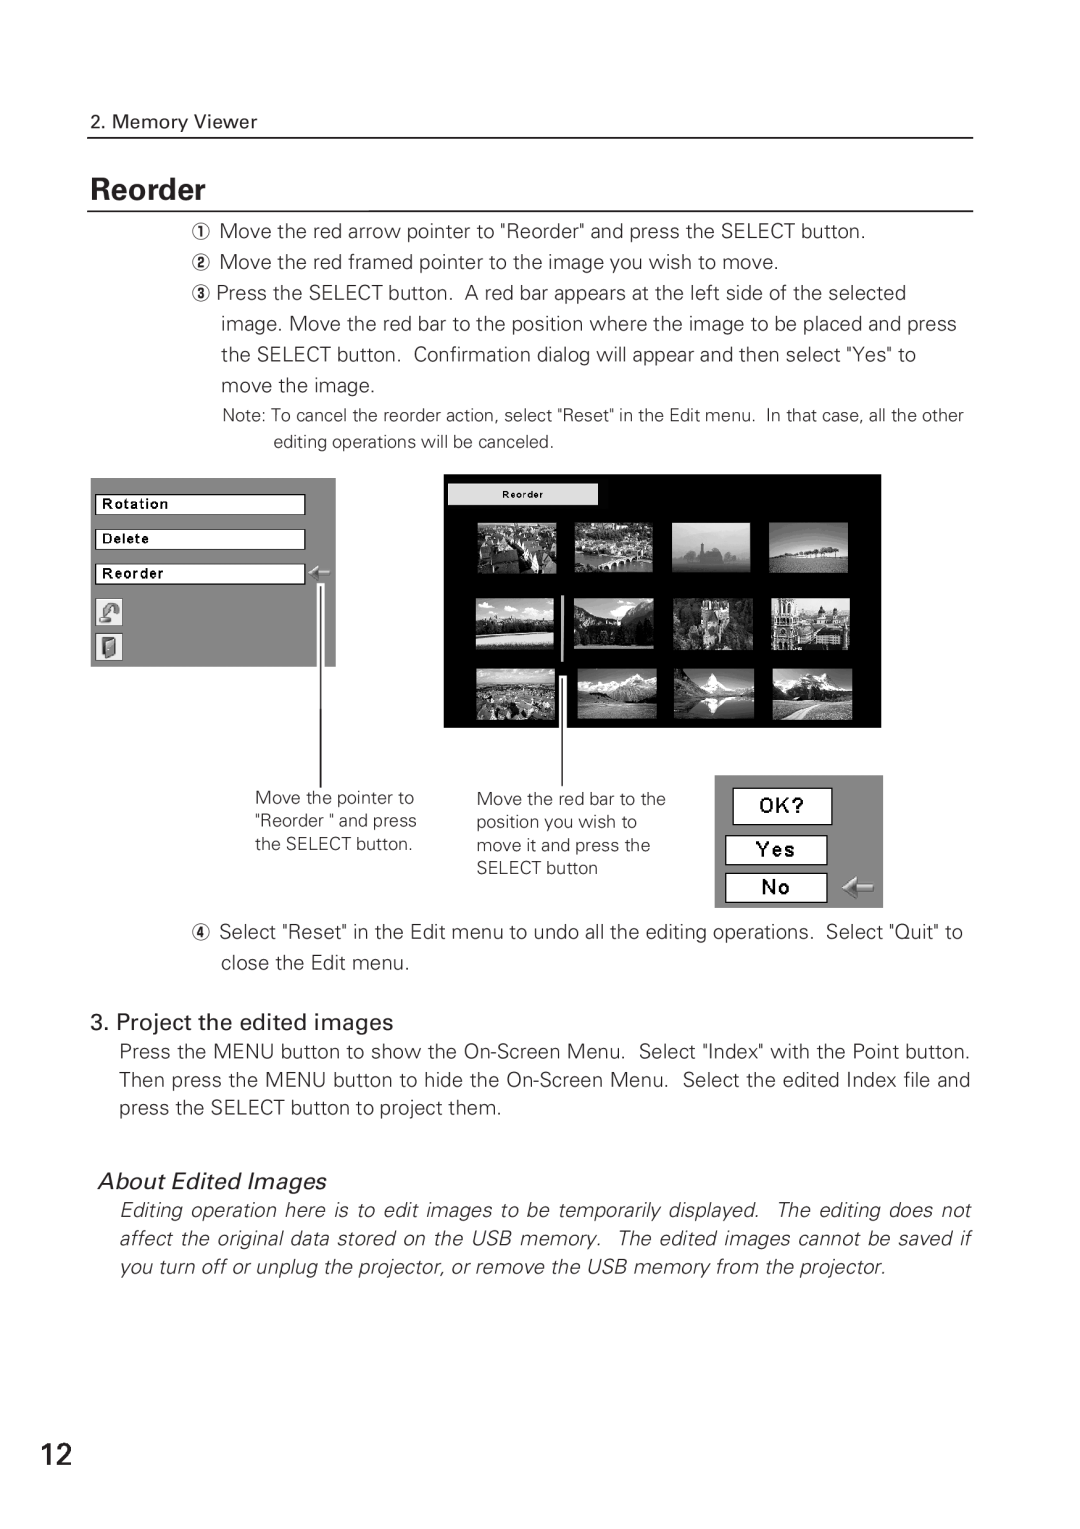 Eiki WL-10 owner manual Reorder, Project the edited images, About Edited Images 